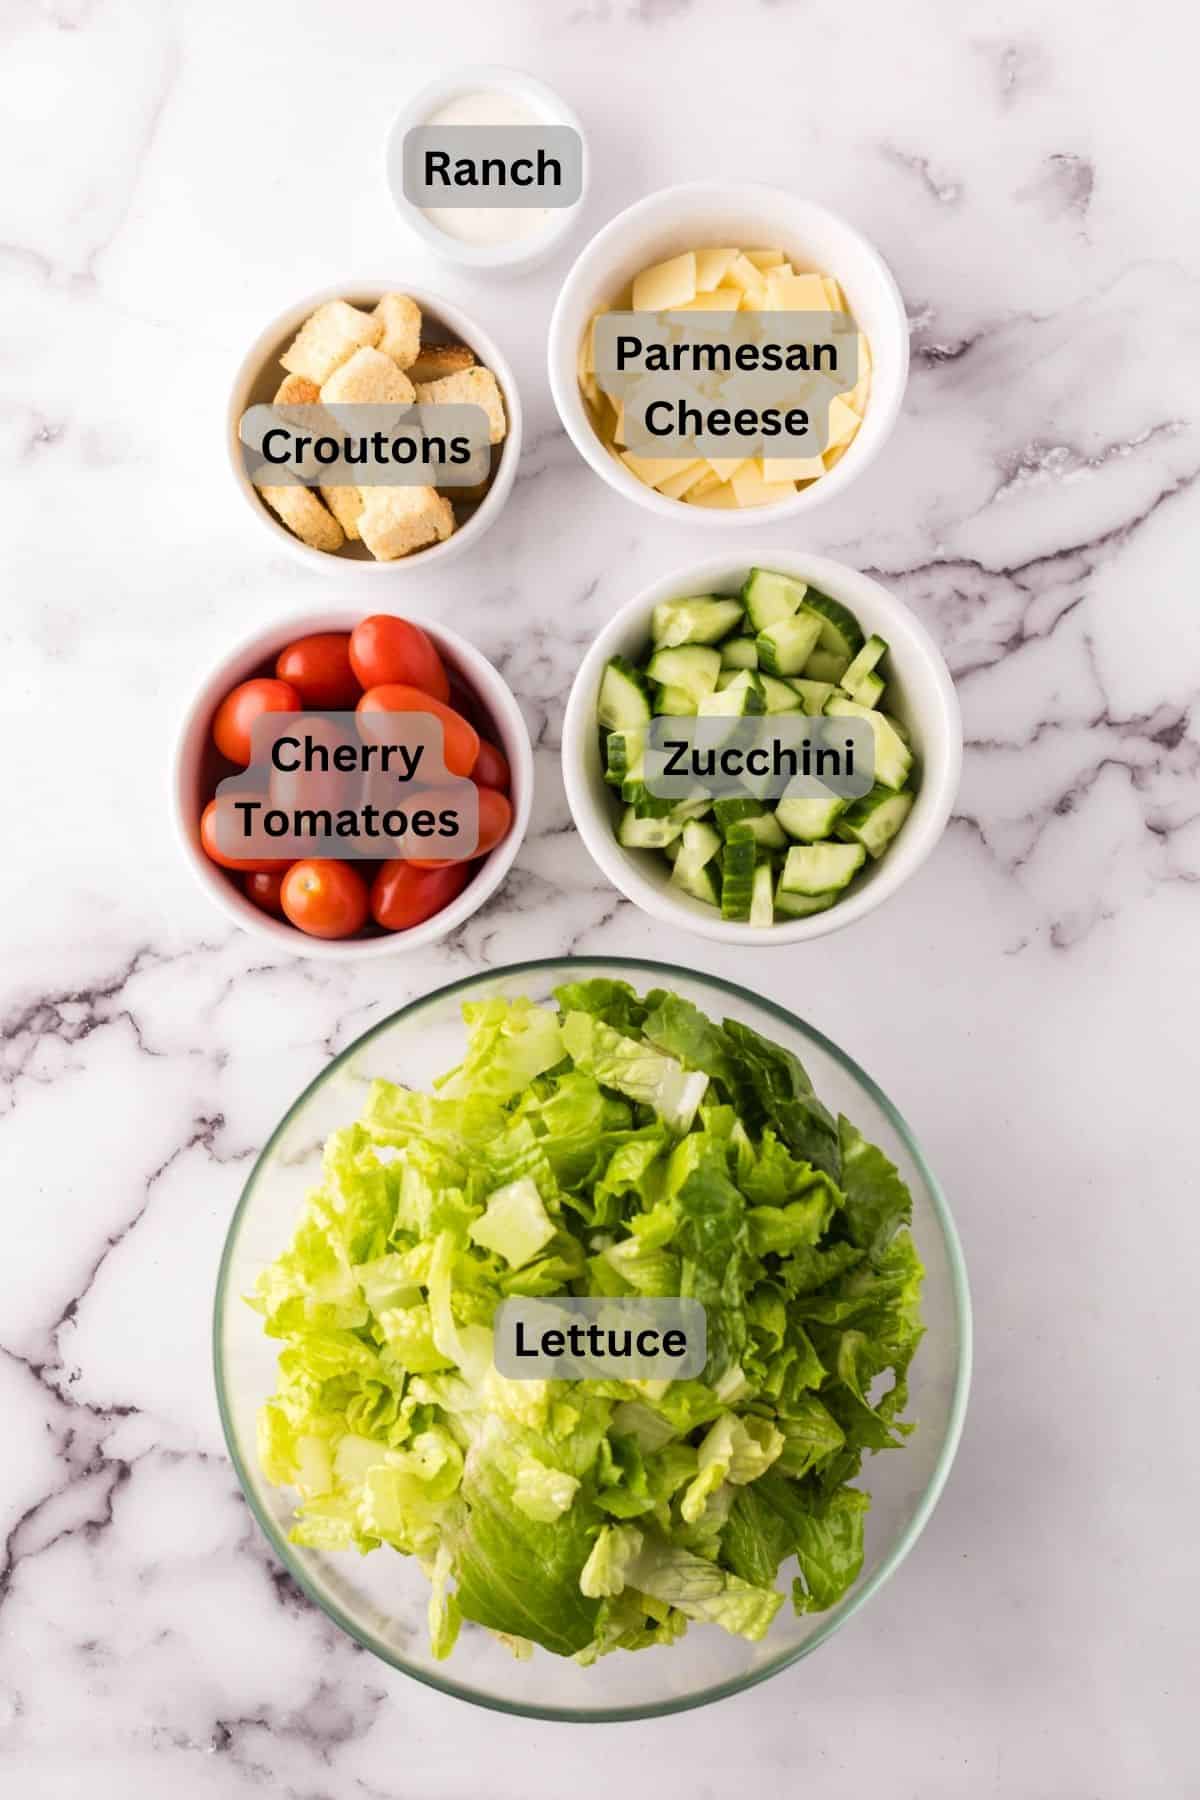 Digitally labeled ingredients for chef salad